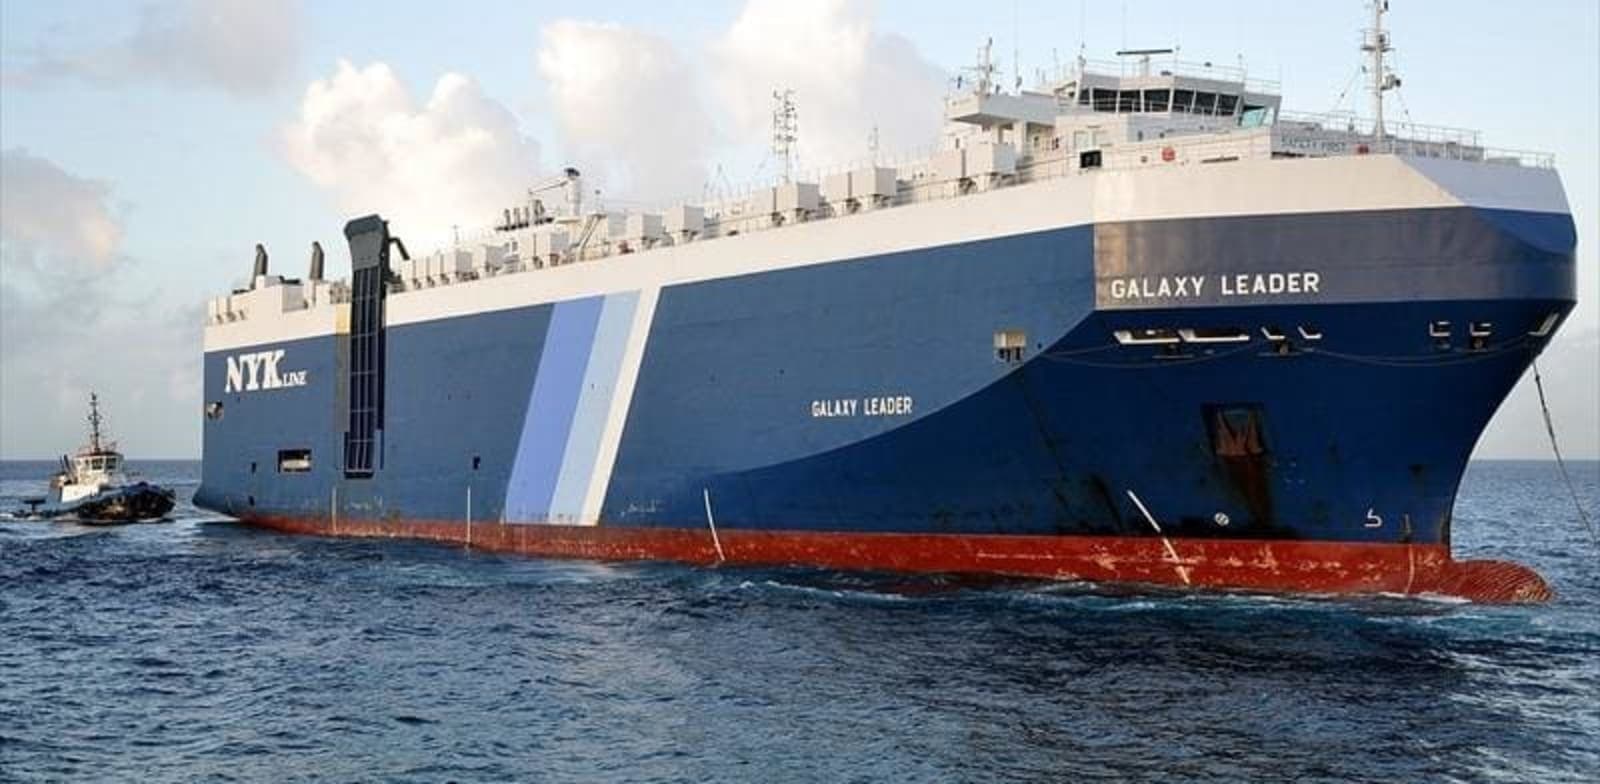 What Did the Houthis Aim to Achieve by Hijacking an Allegedly Israeli-Linked Ship?